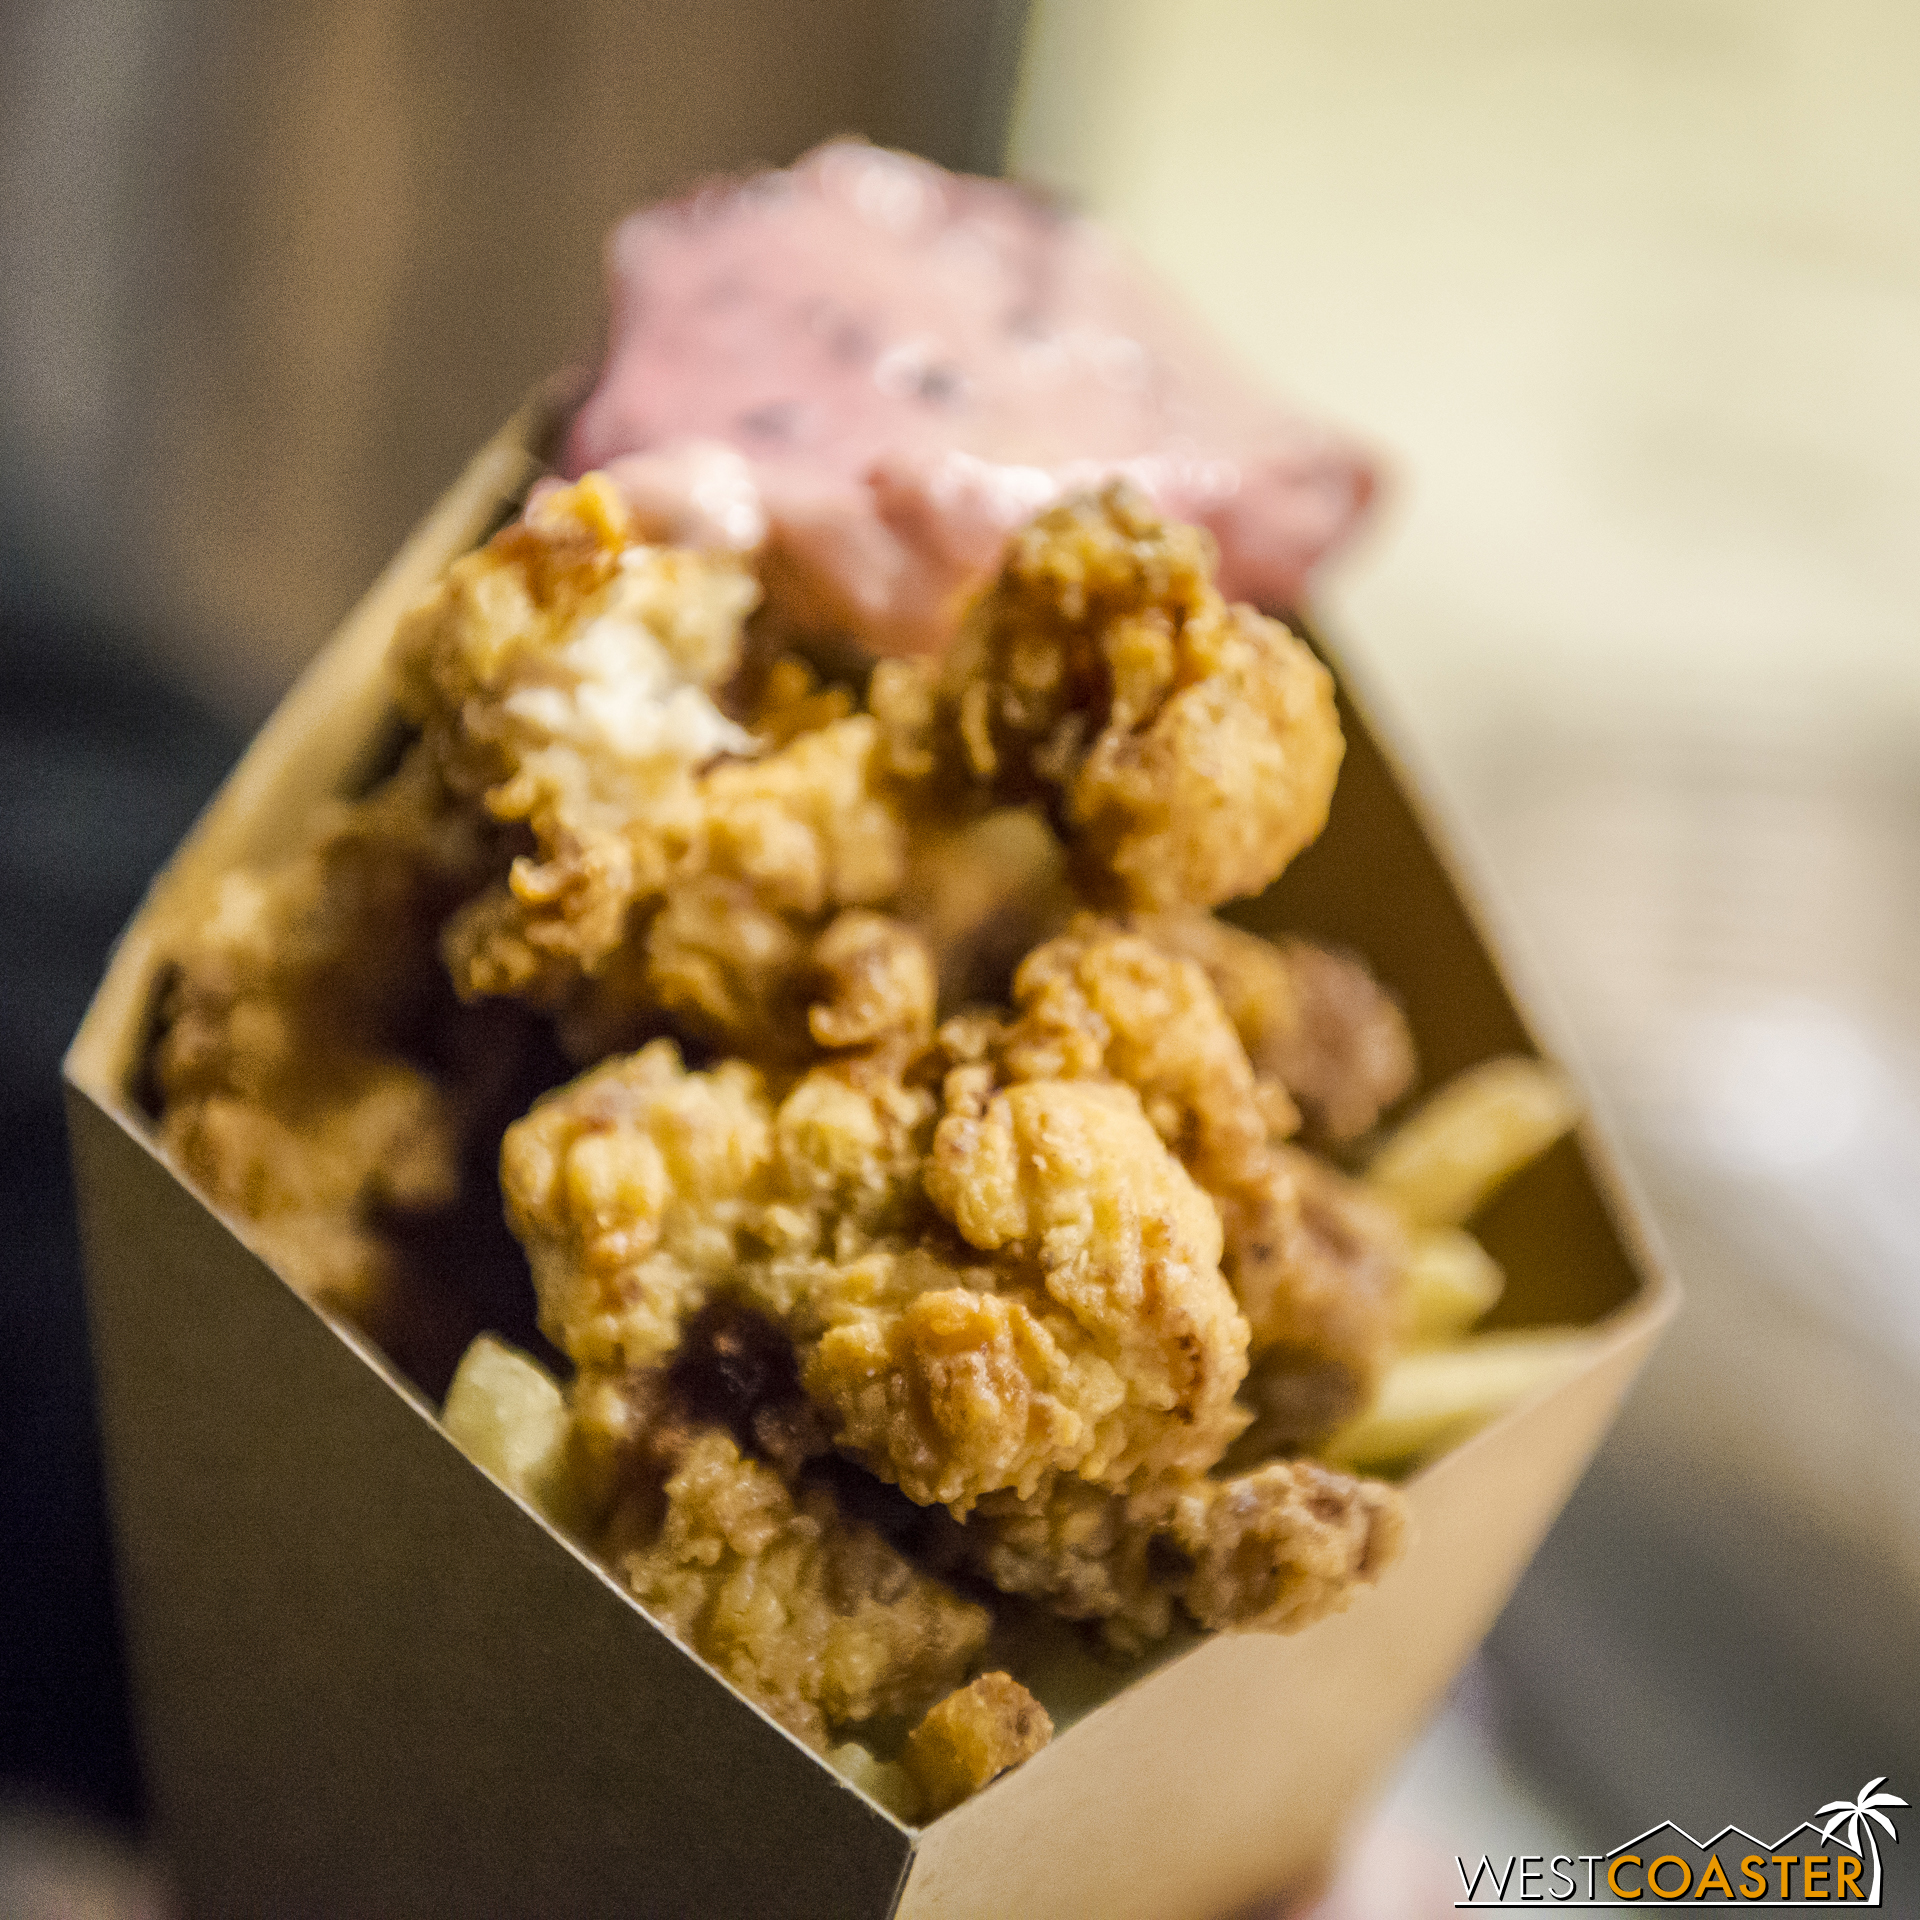  Guests can get the Boysenberry Gator Bites over at the Fry Stand near the front of Ghost Town.&nbsp; It's pretty tasty, if you are brave enough to try it.&nbsp; Truthfully, it tastes like chicken but with a fishy feel to it.&nbsp; That might put som